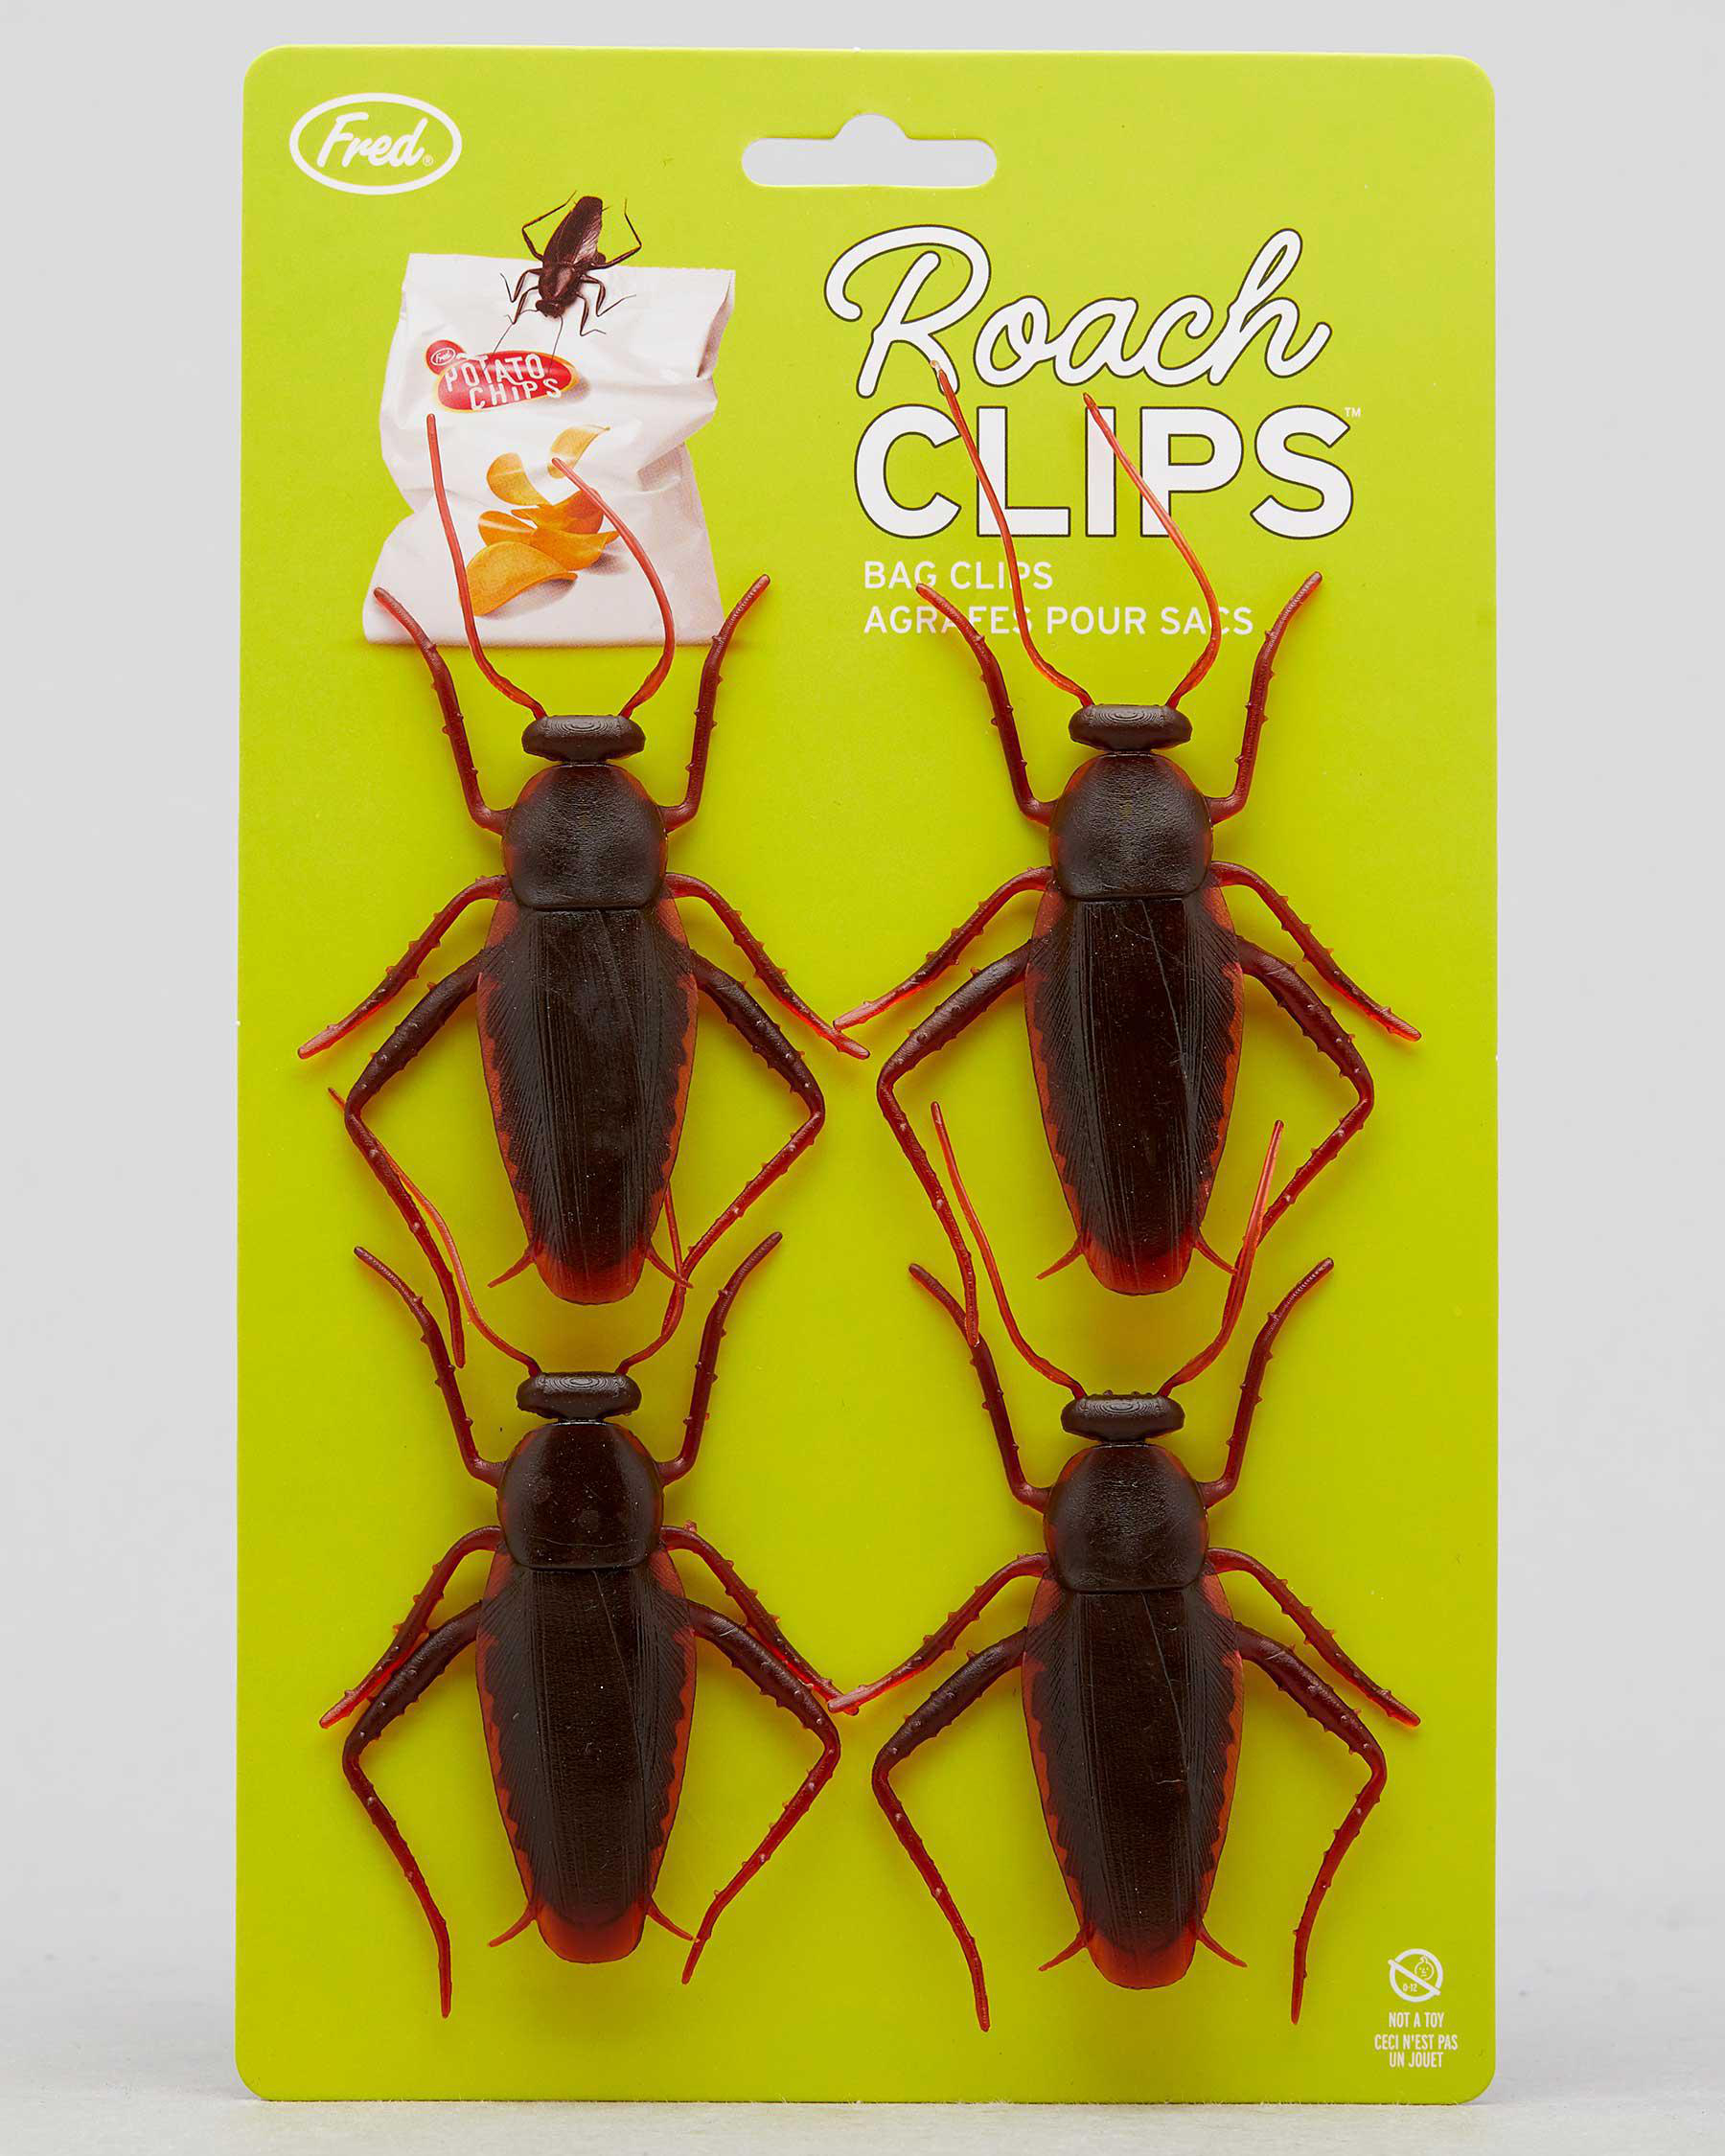 Fred Bag Clips Roach